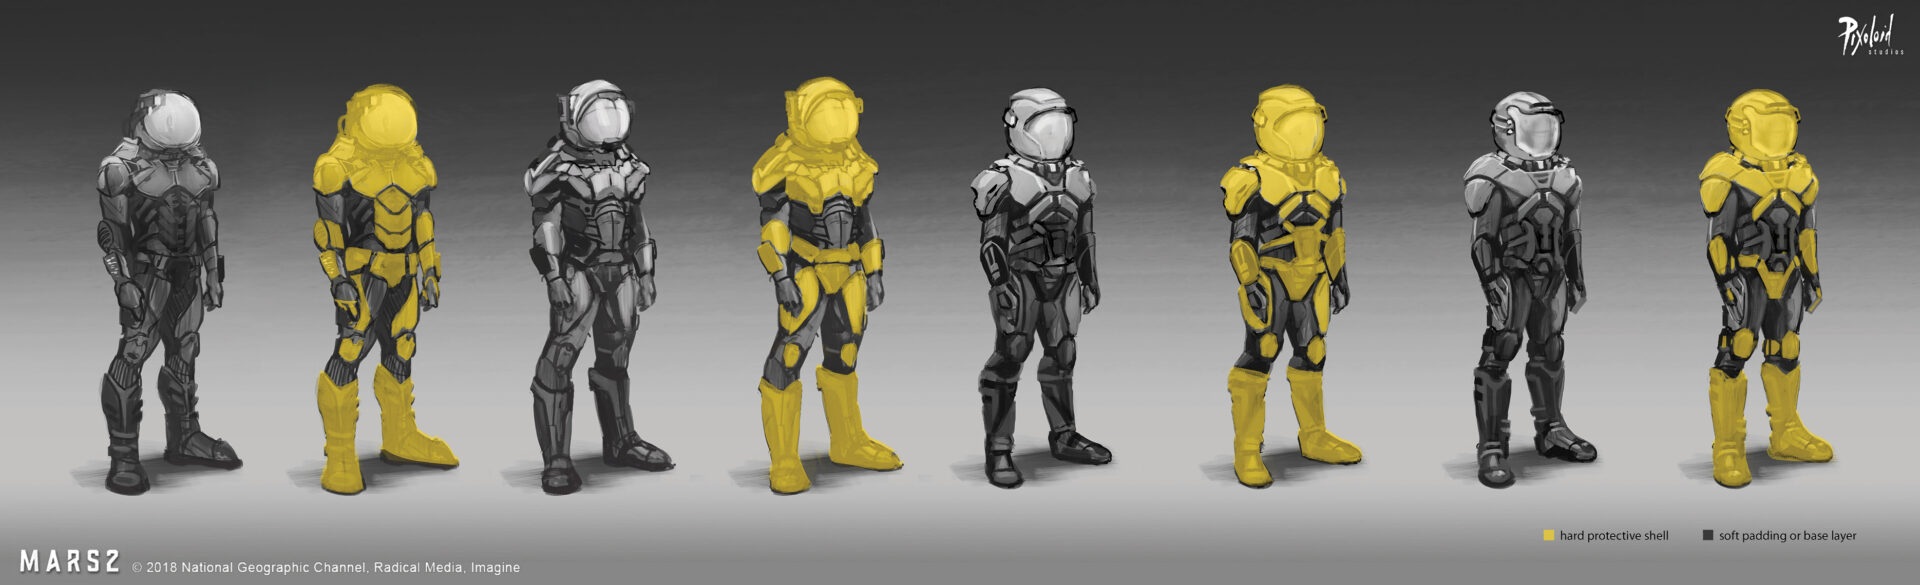 Space suit designs for MARS series / National Geographic